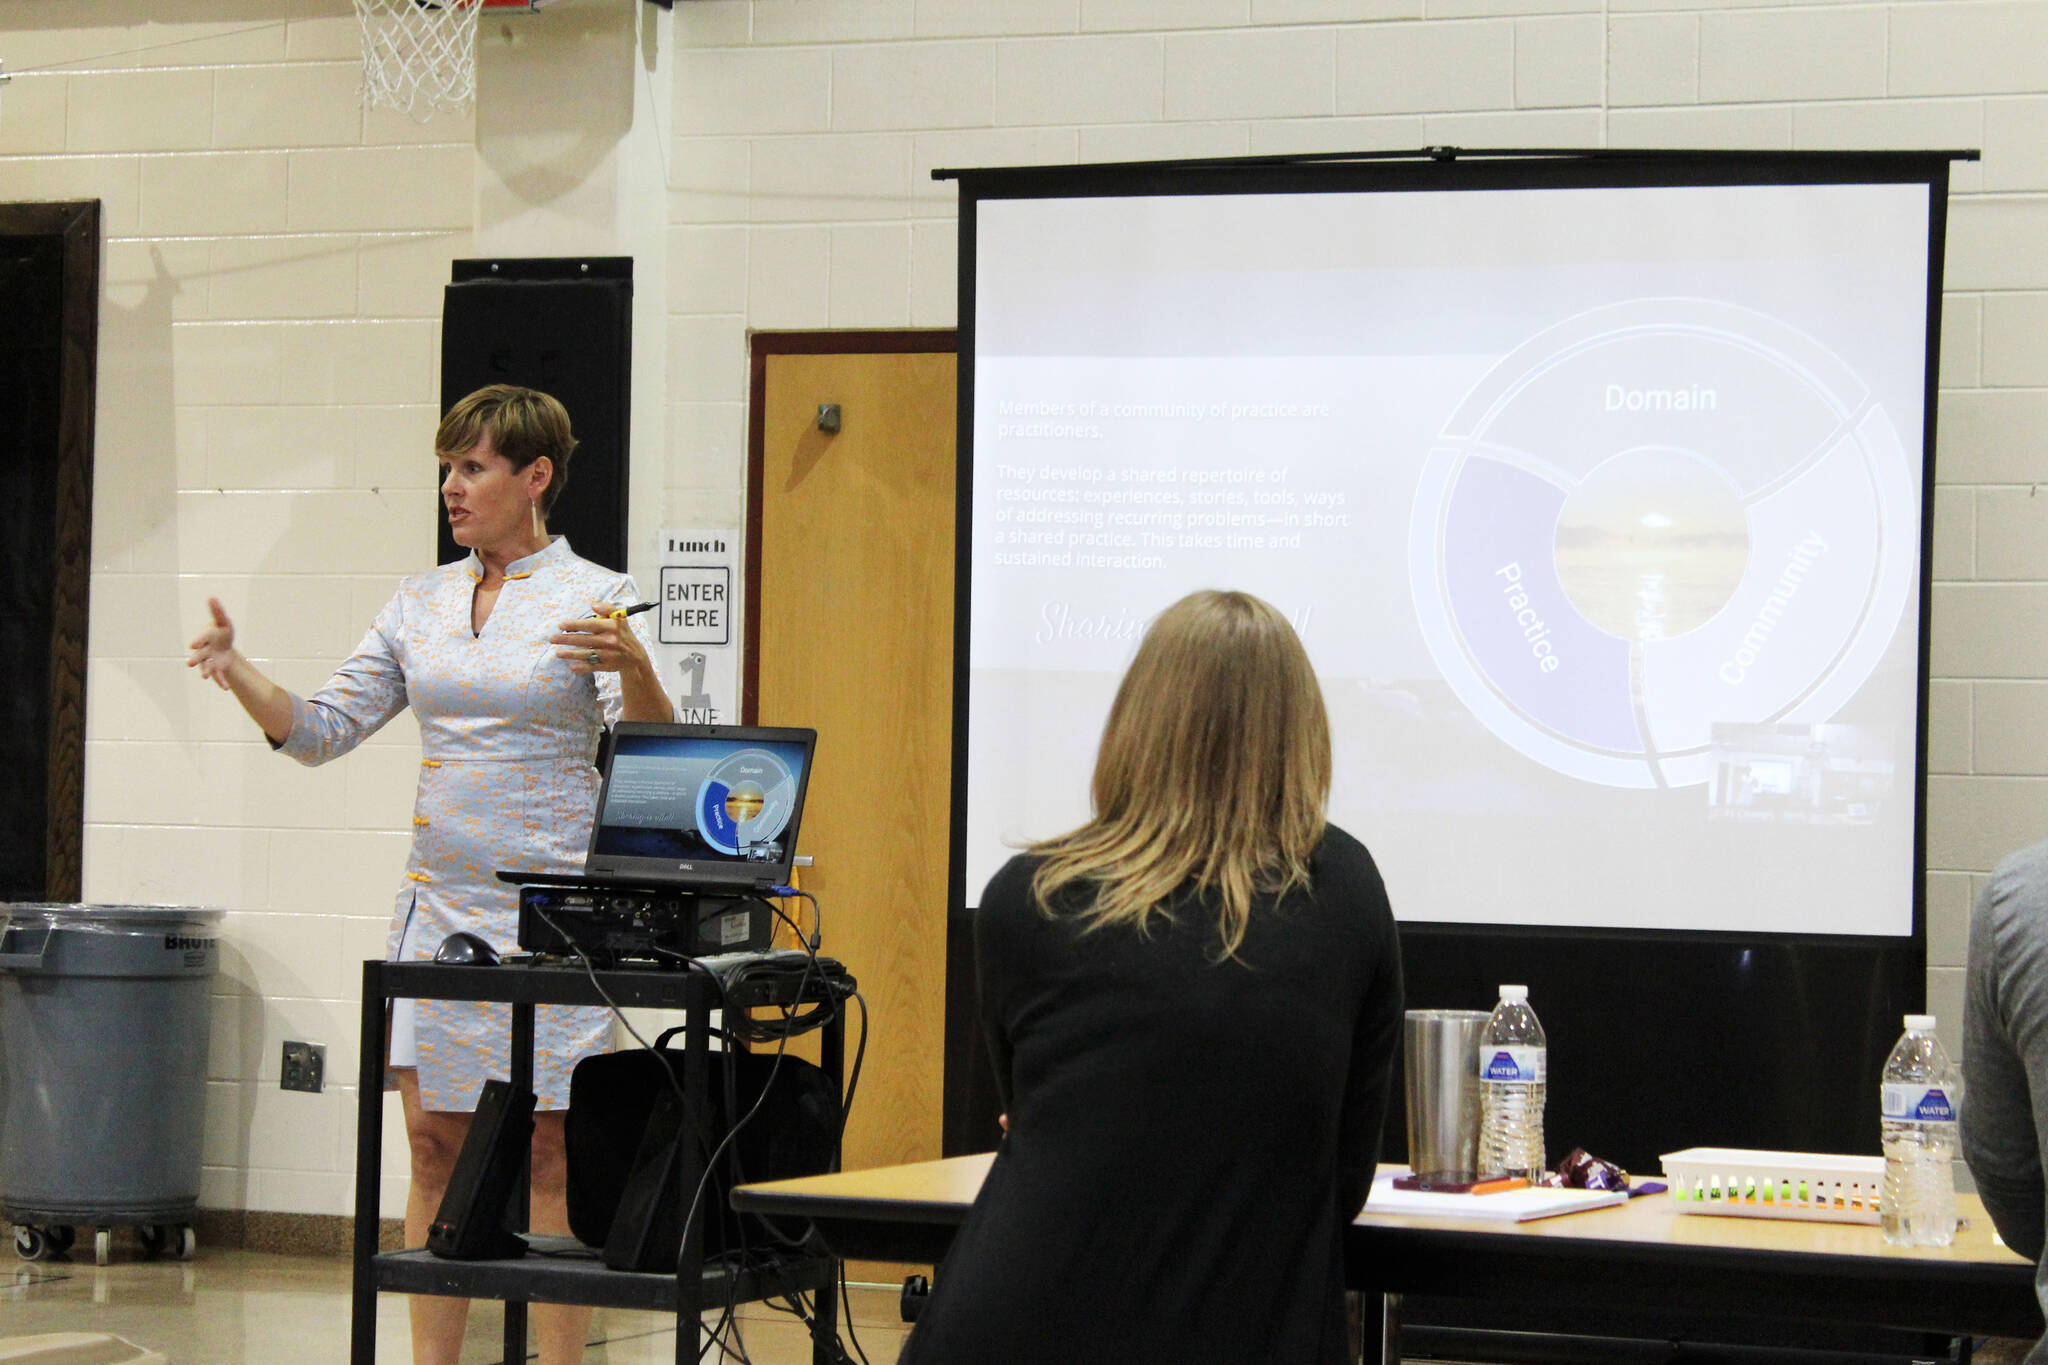 Amanda Adams leads a session during an in-service at Skyview Middle School on Friday, Aug. 13, 2021 in Soldotna, Alaska. (Ashlyn O’Hara/Peninsula Clarion)